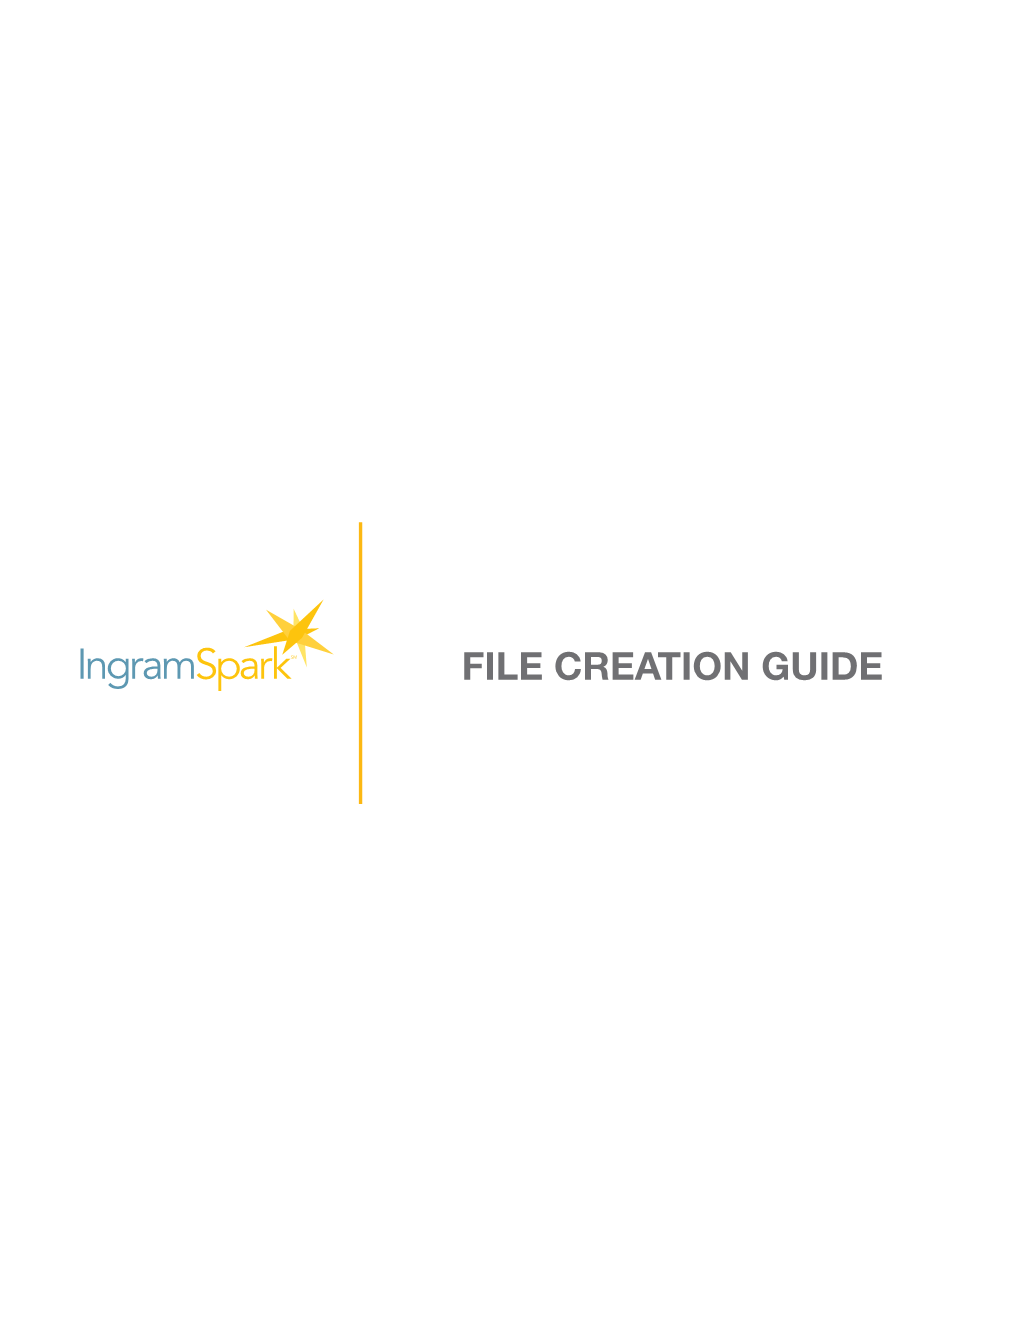 File Creation Guide Table of Contents